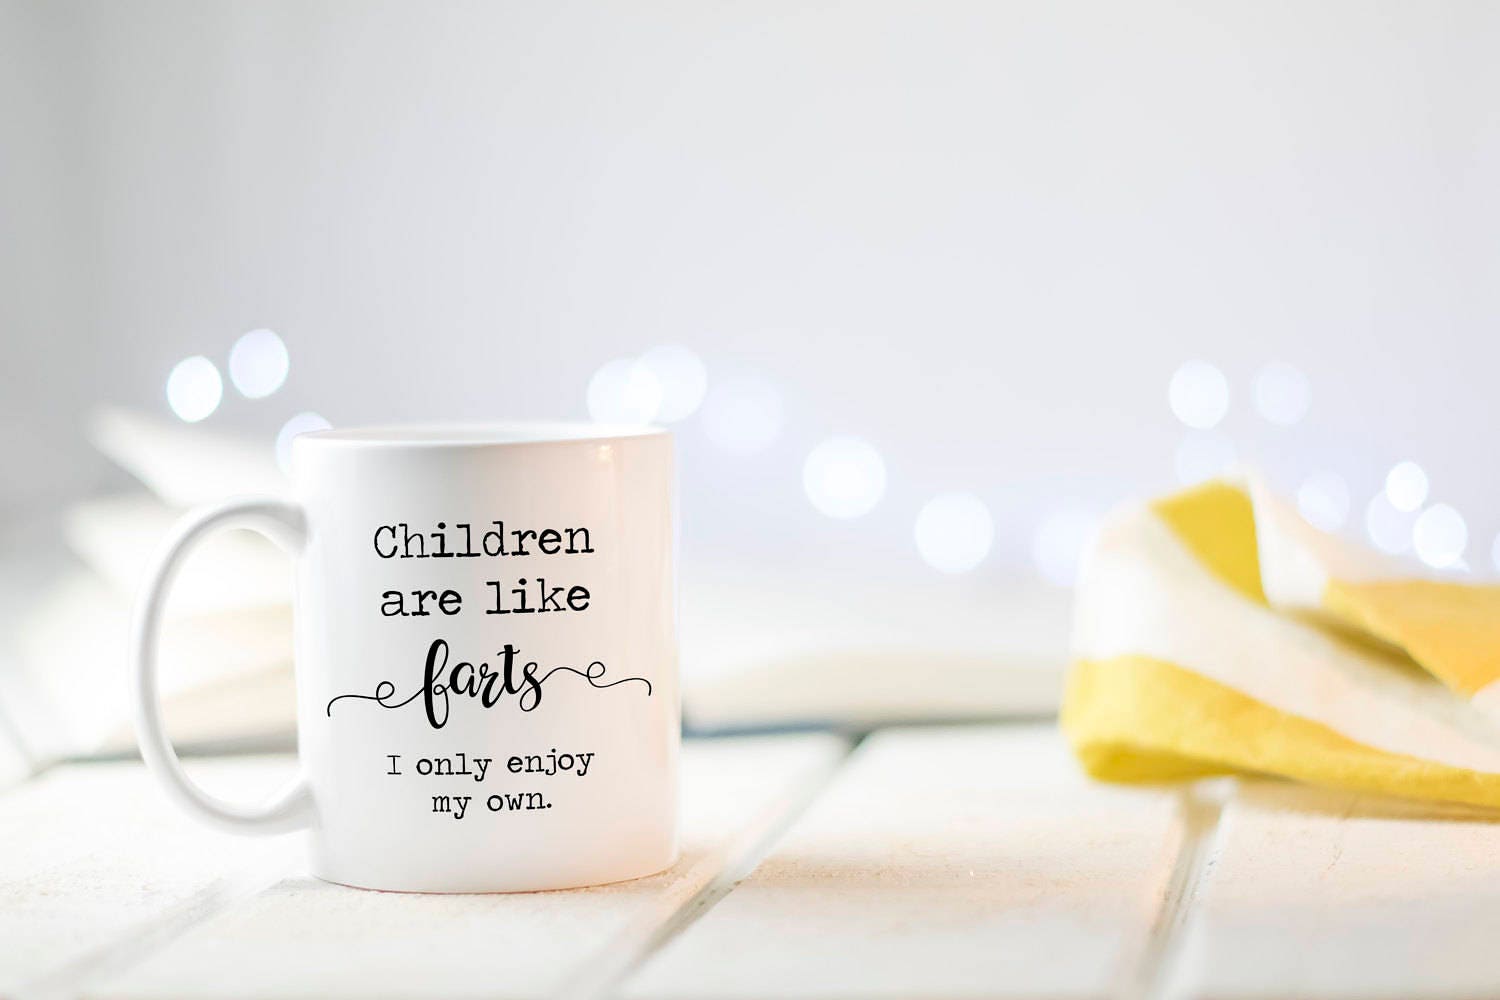 Funny Gifts Couples, Children are like farts I only enjoy my own, Funny Mother's Day Gift, Funny Mug, Gift for Him, Funny Mugs for Men,